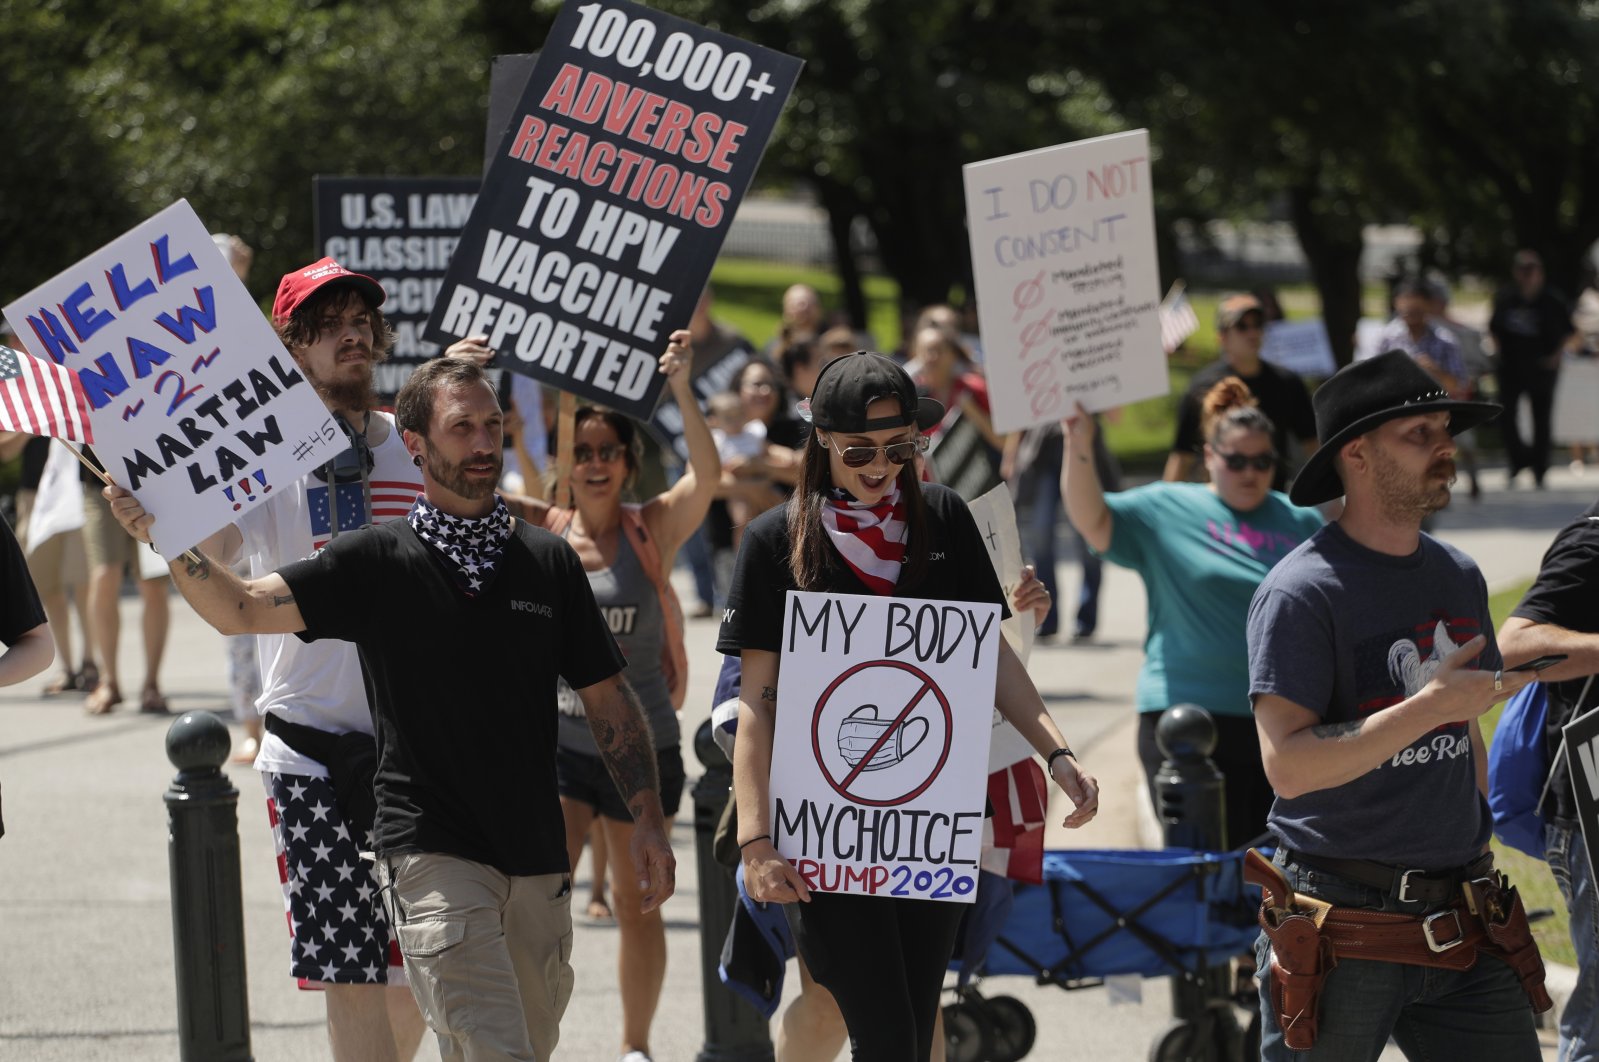 Ignoring social distancing and mandates to wear masks, protesters attend an "Open Texas" rally at the Texas State Capitol, April 25, 2020, in Austin. (AP Photo)